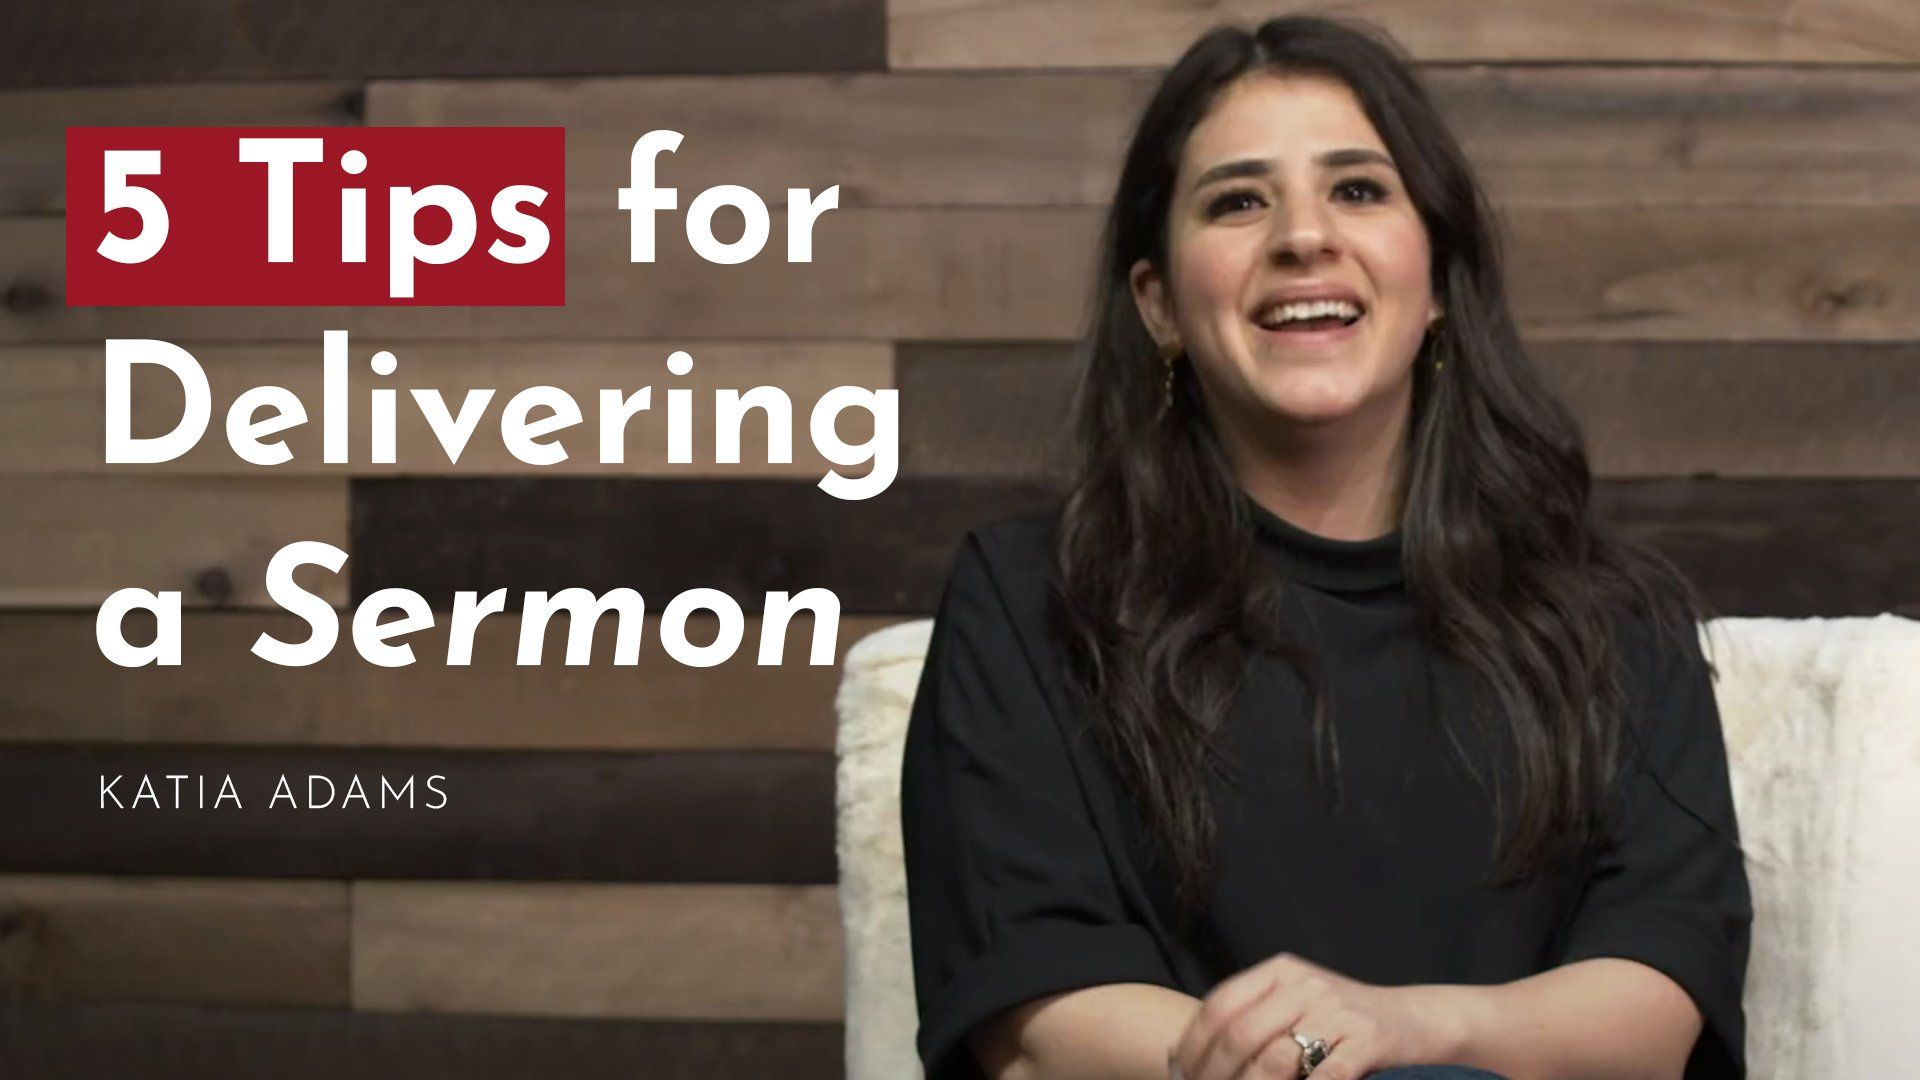 Katia Adams talks about basic homiletics and 5 tips for delivering a sermon.